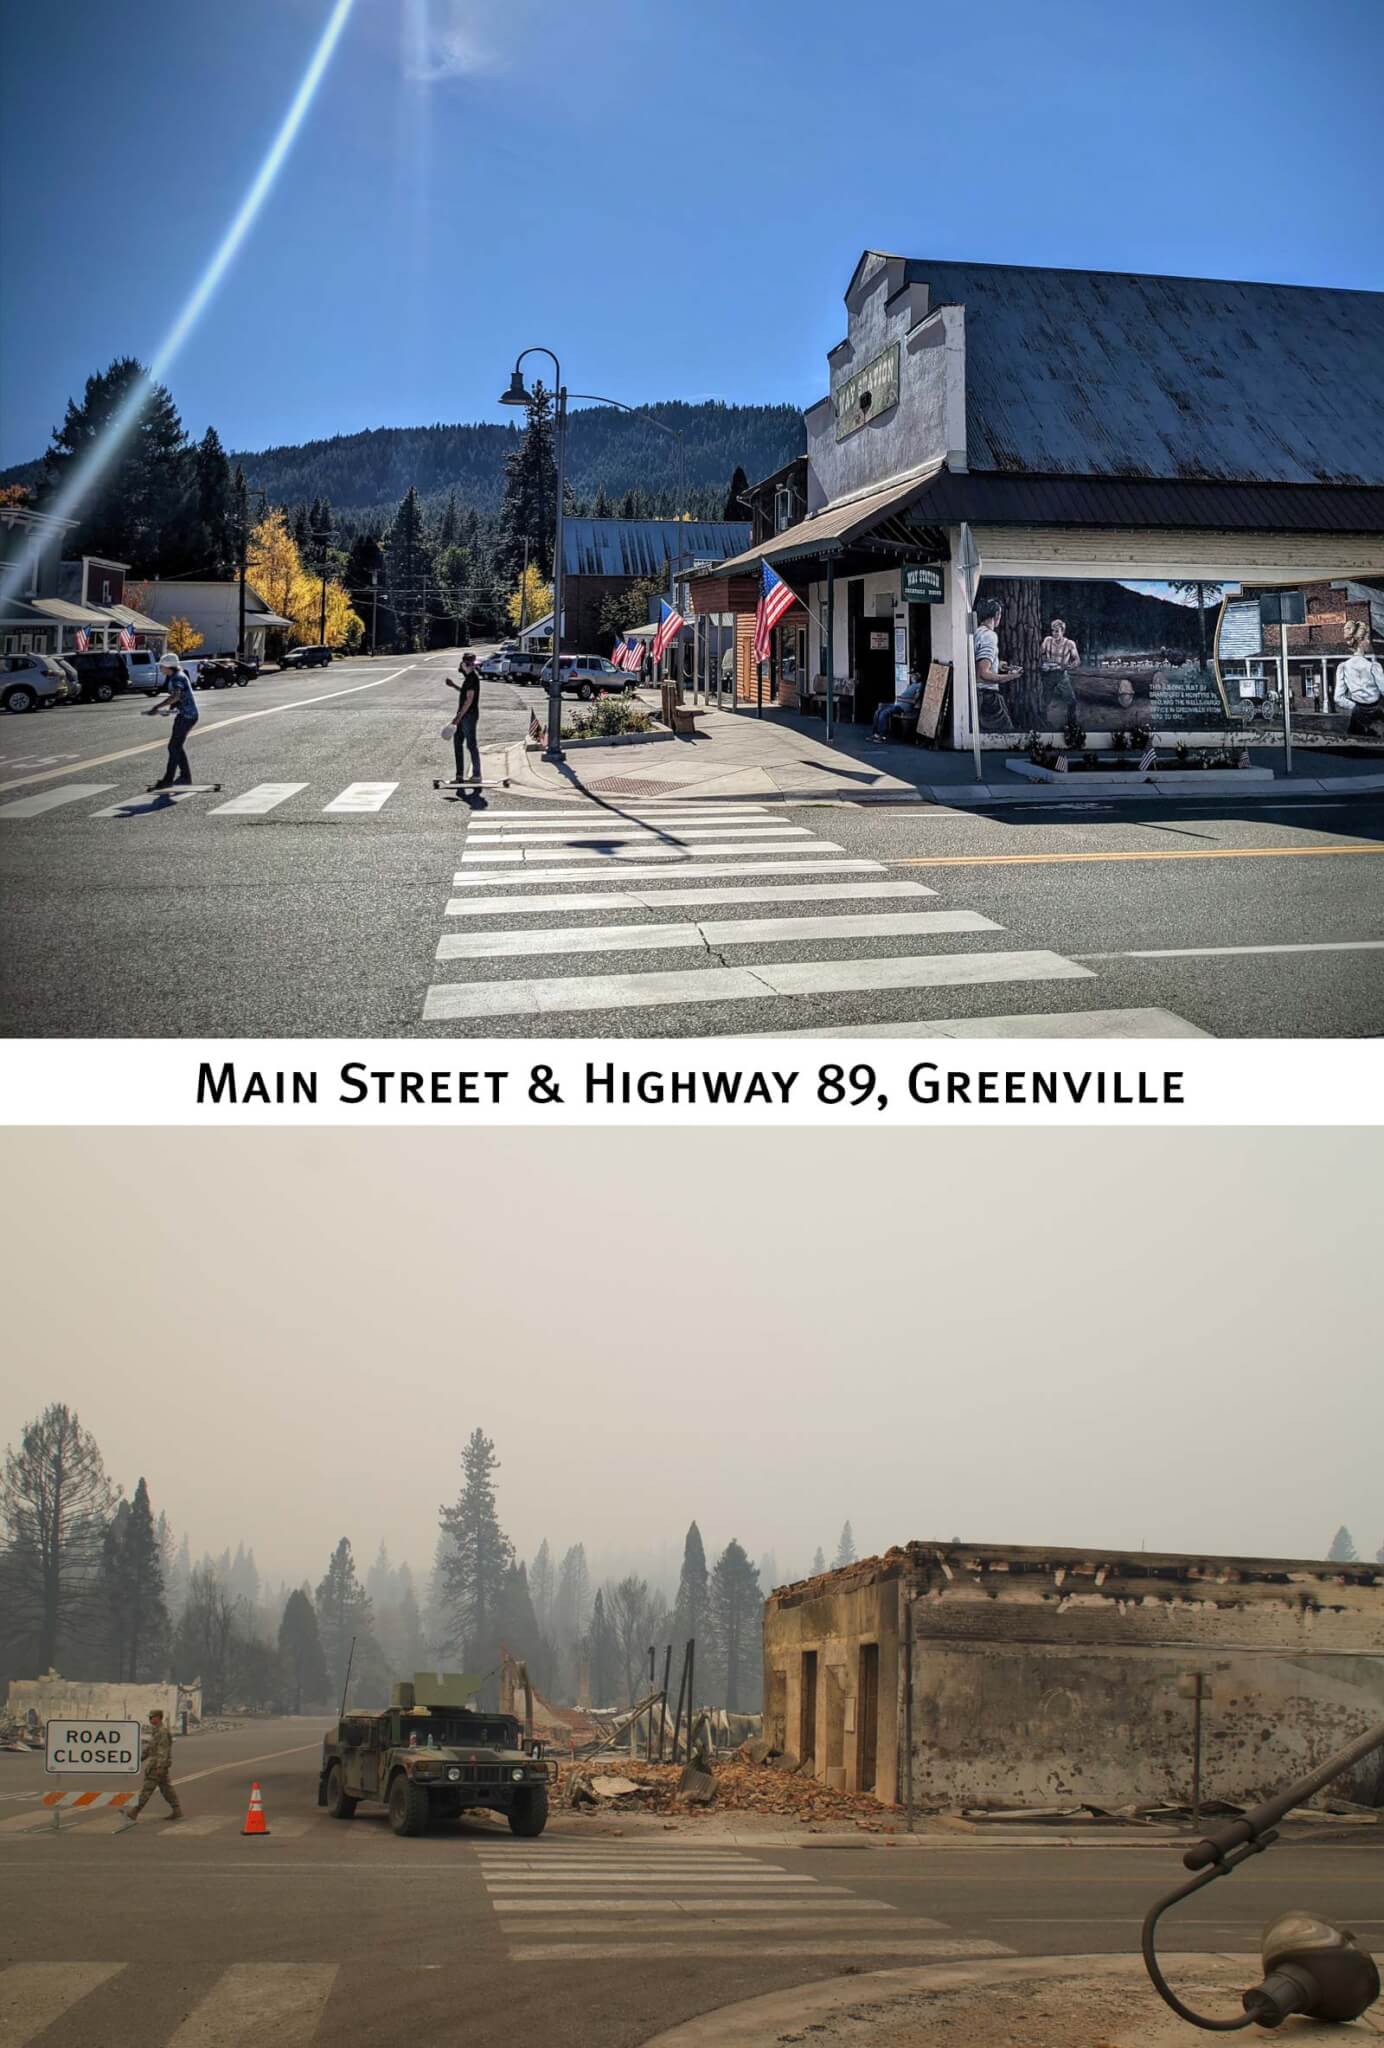 Greenville before and after the Dixie Fire